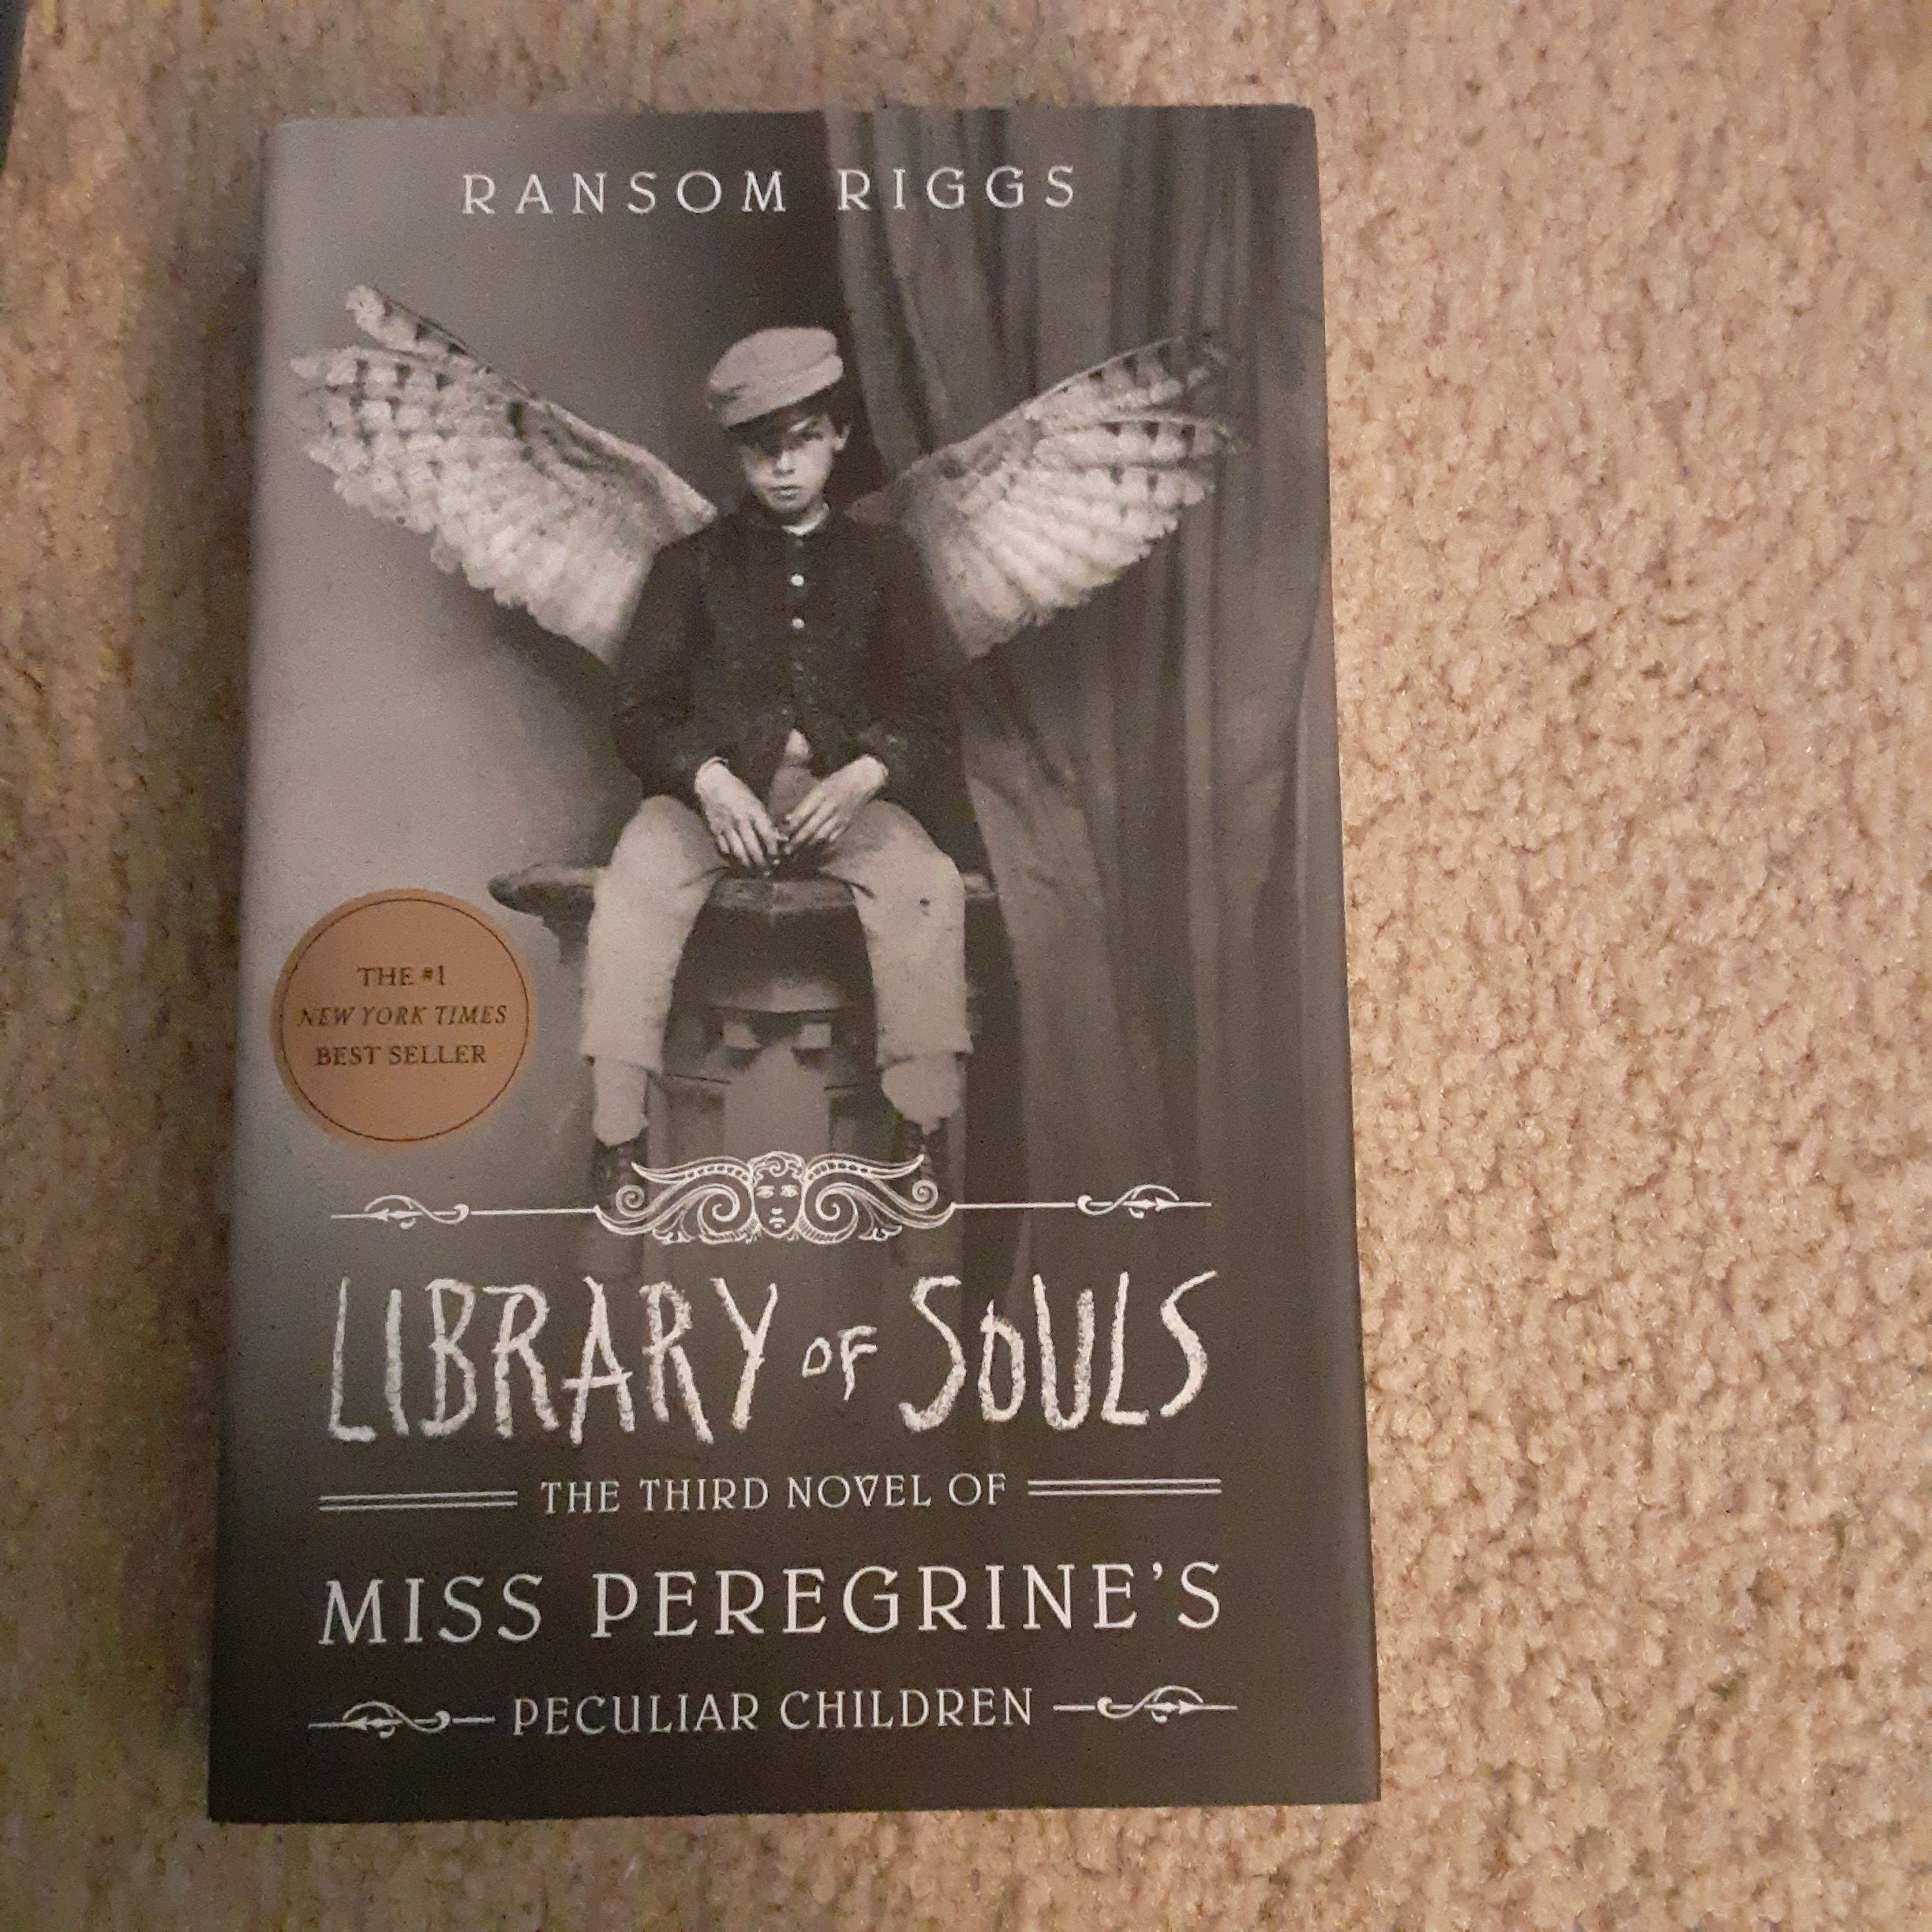 Hardcover　Pangobooks　Library　Ransom　by　of　Souls　Riggs,